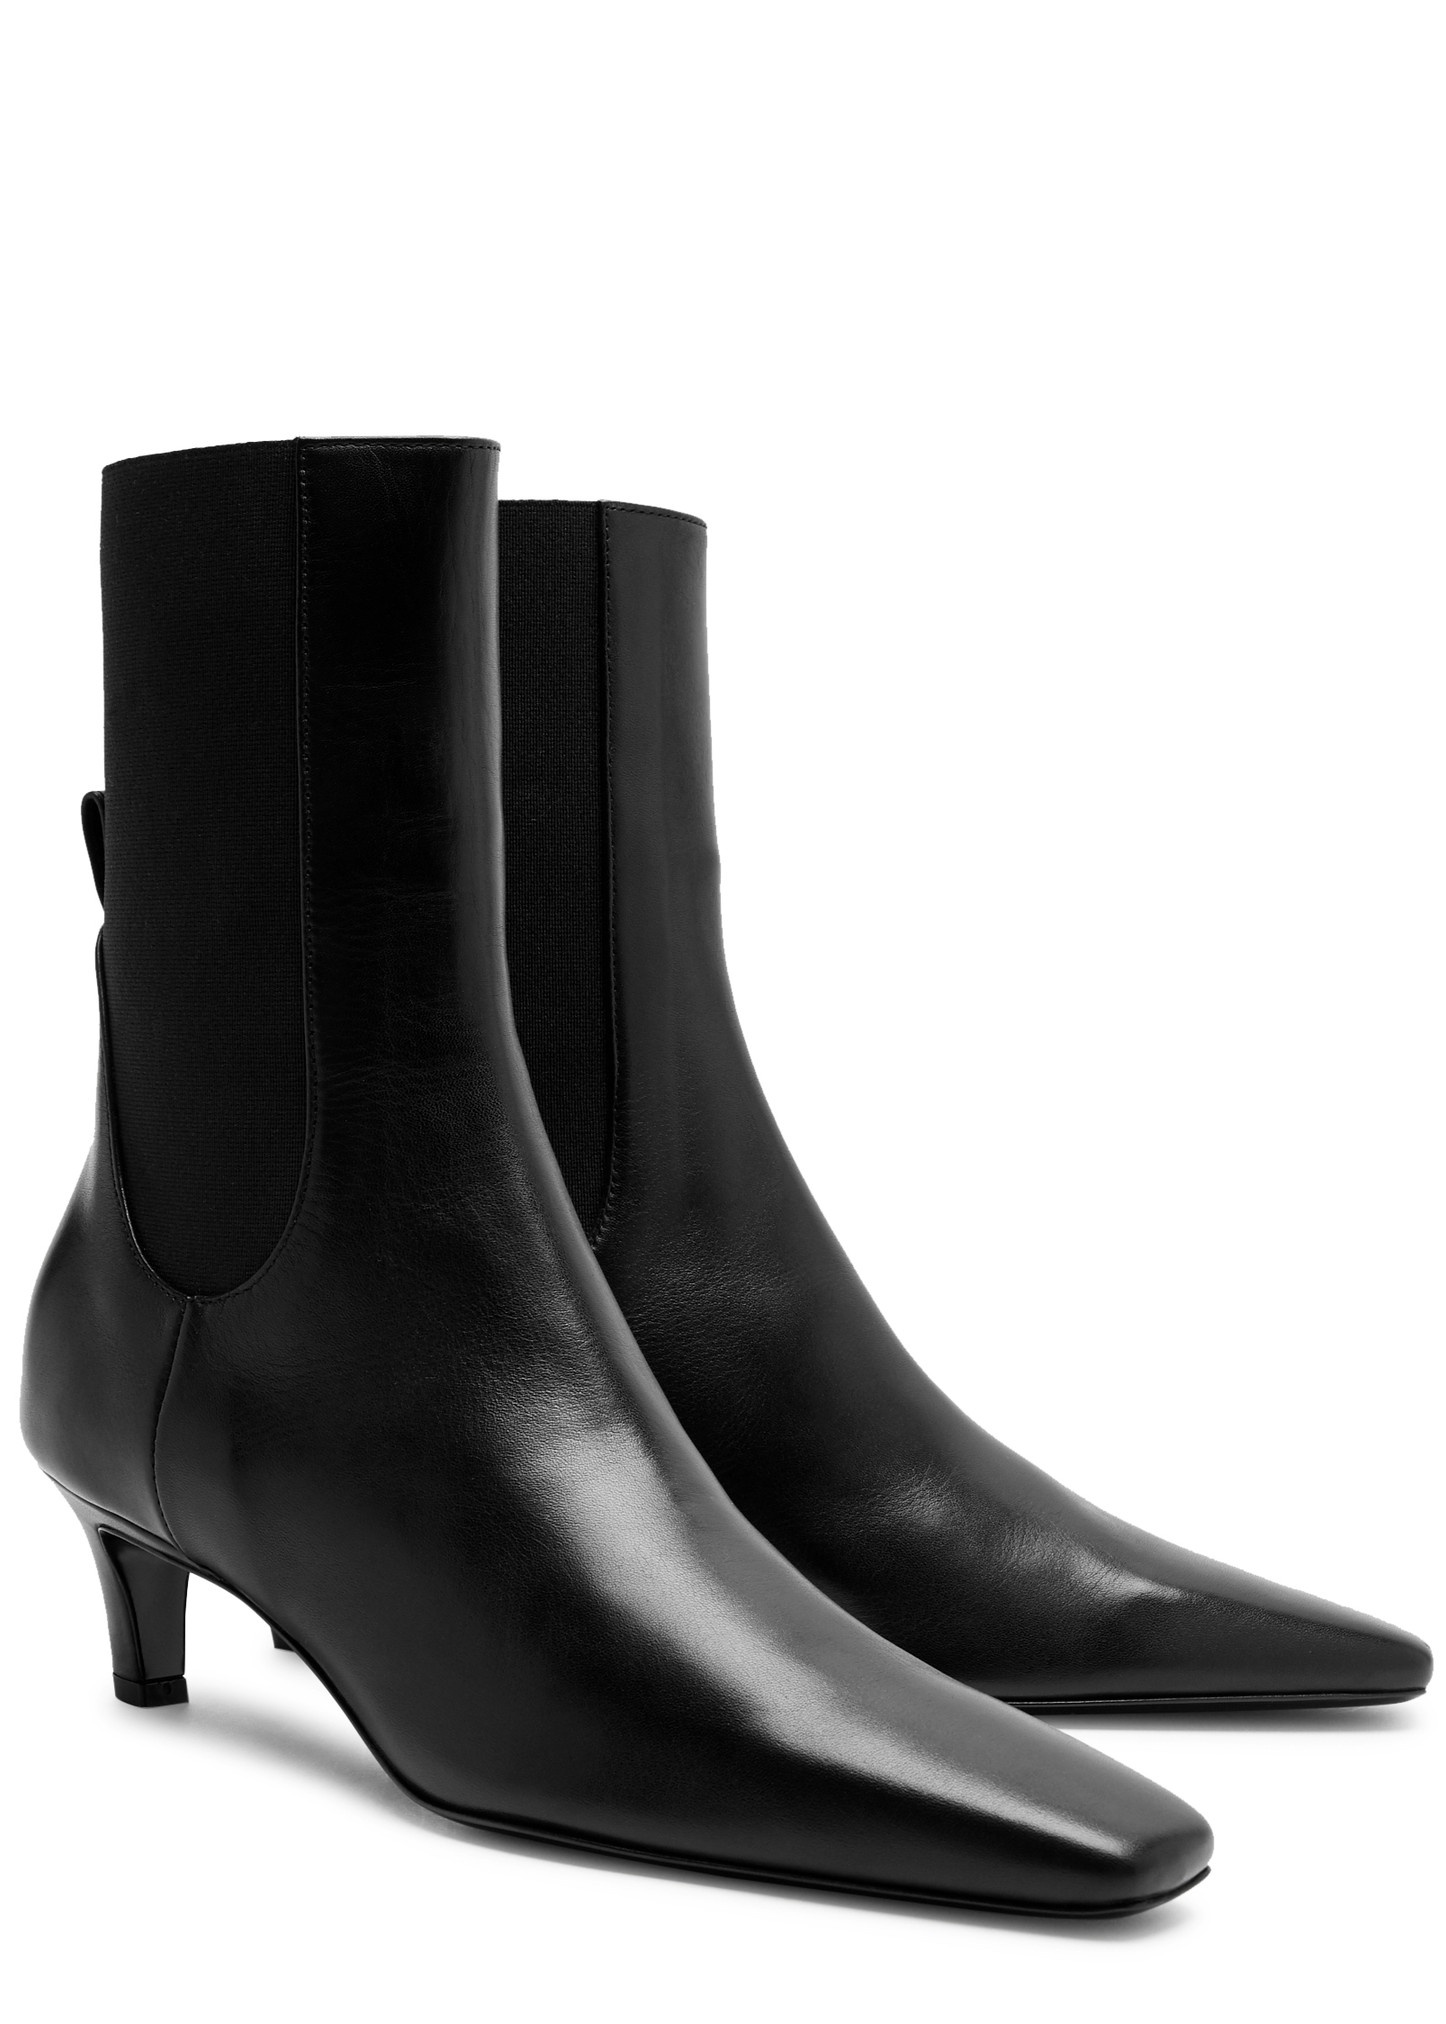 50 leather ankle boots - 2